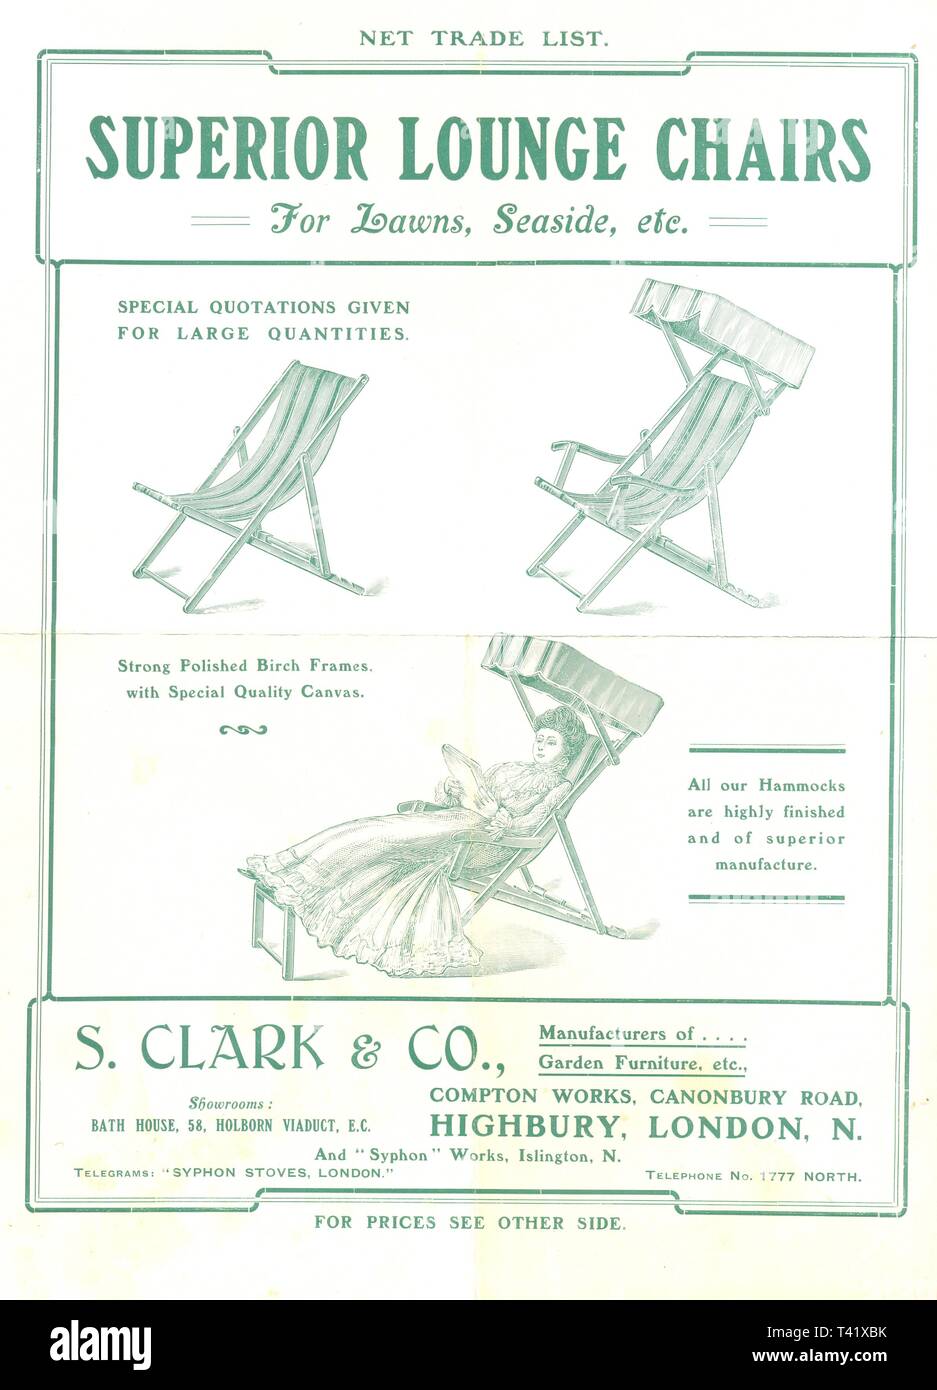 Trade price list for S. Clark & Co's Superior Lounge Chairs circa 1895 Stock Photo